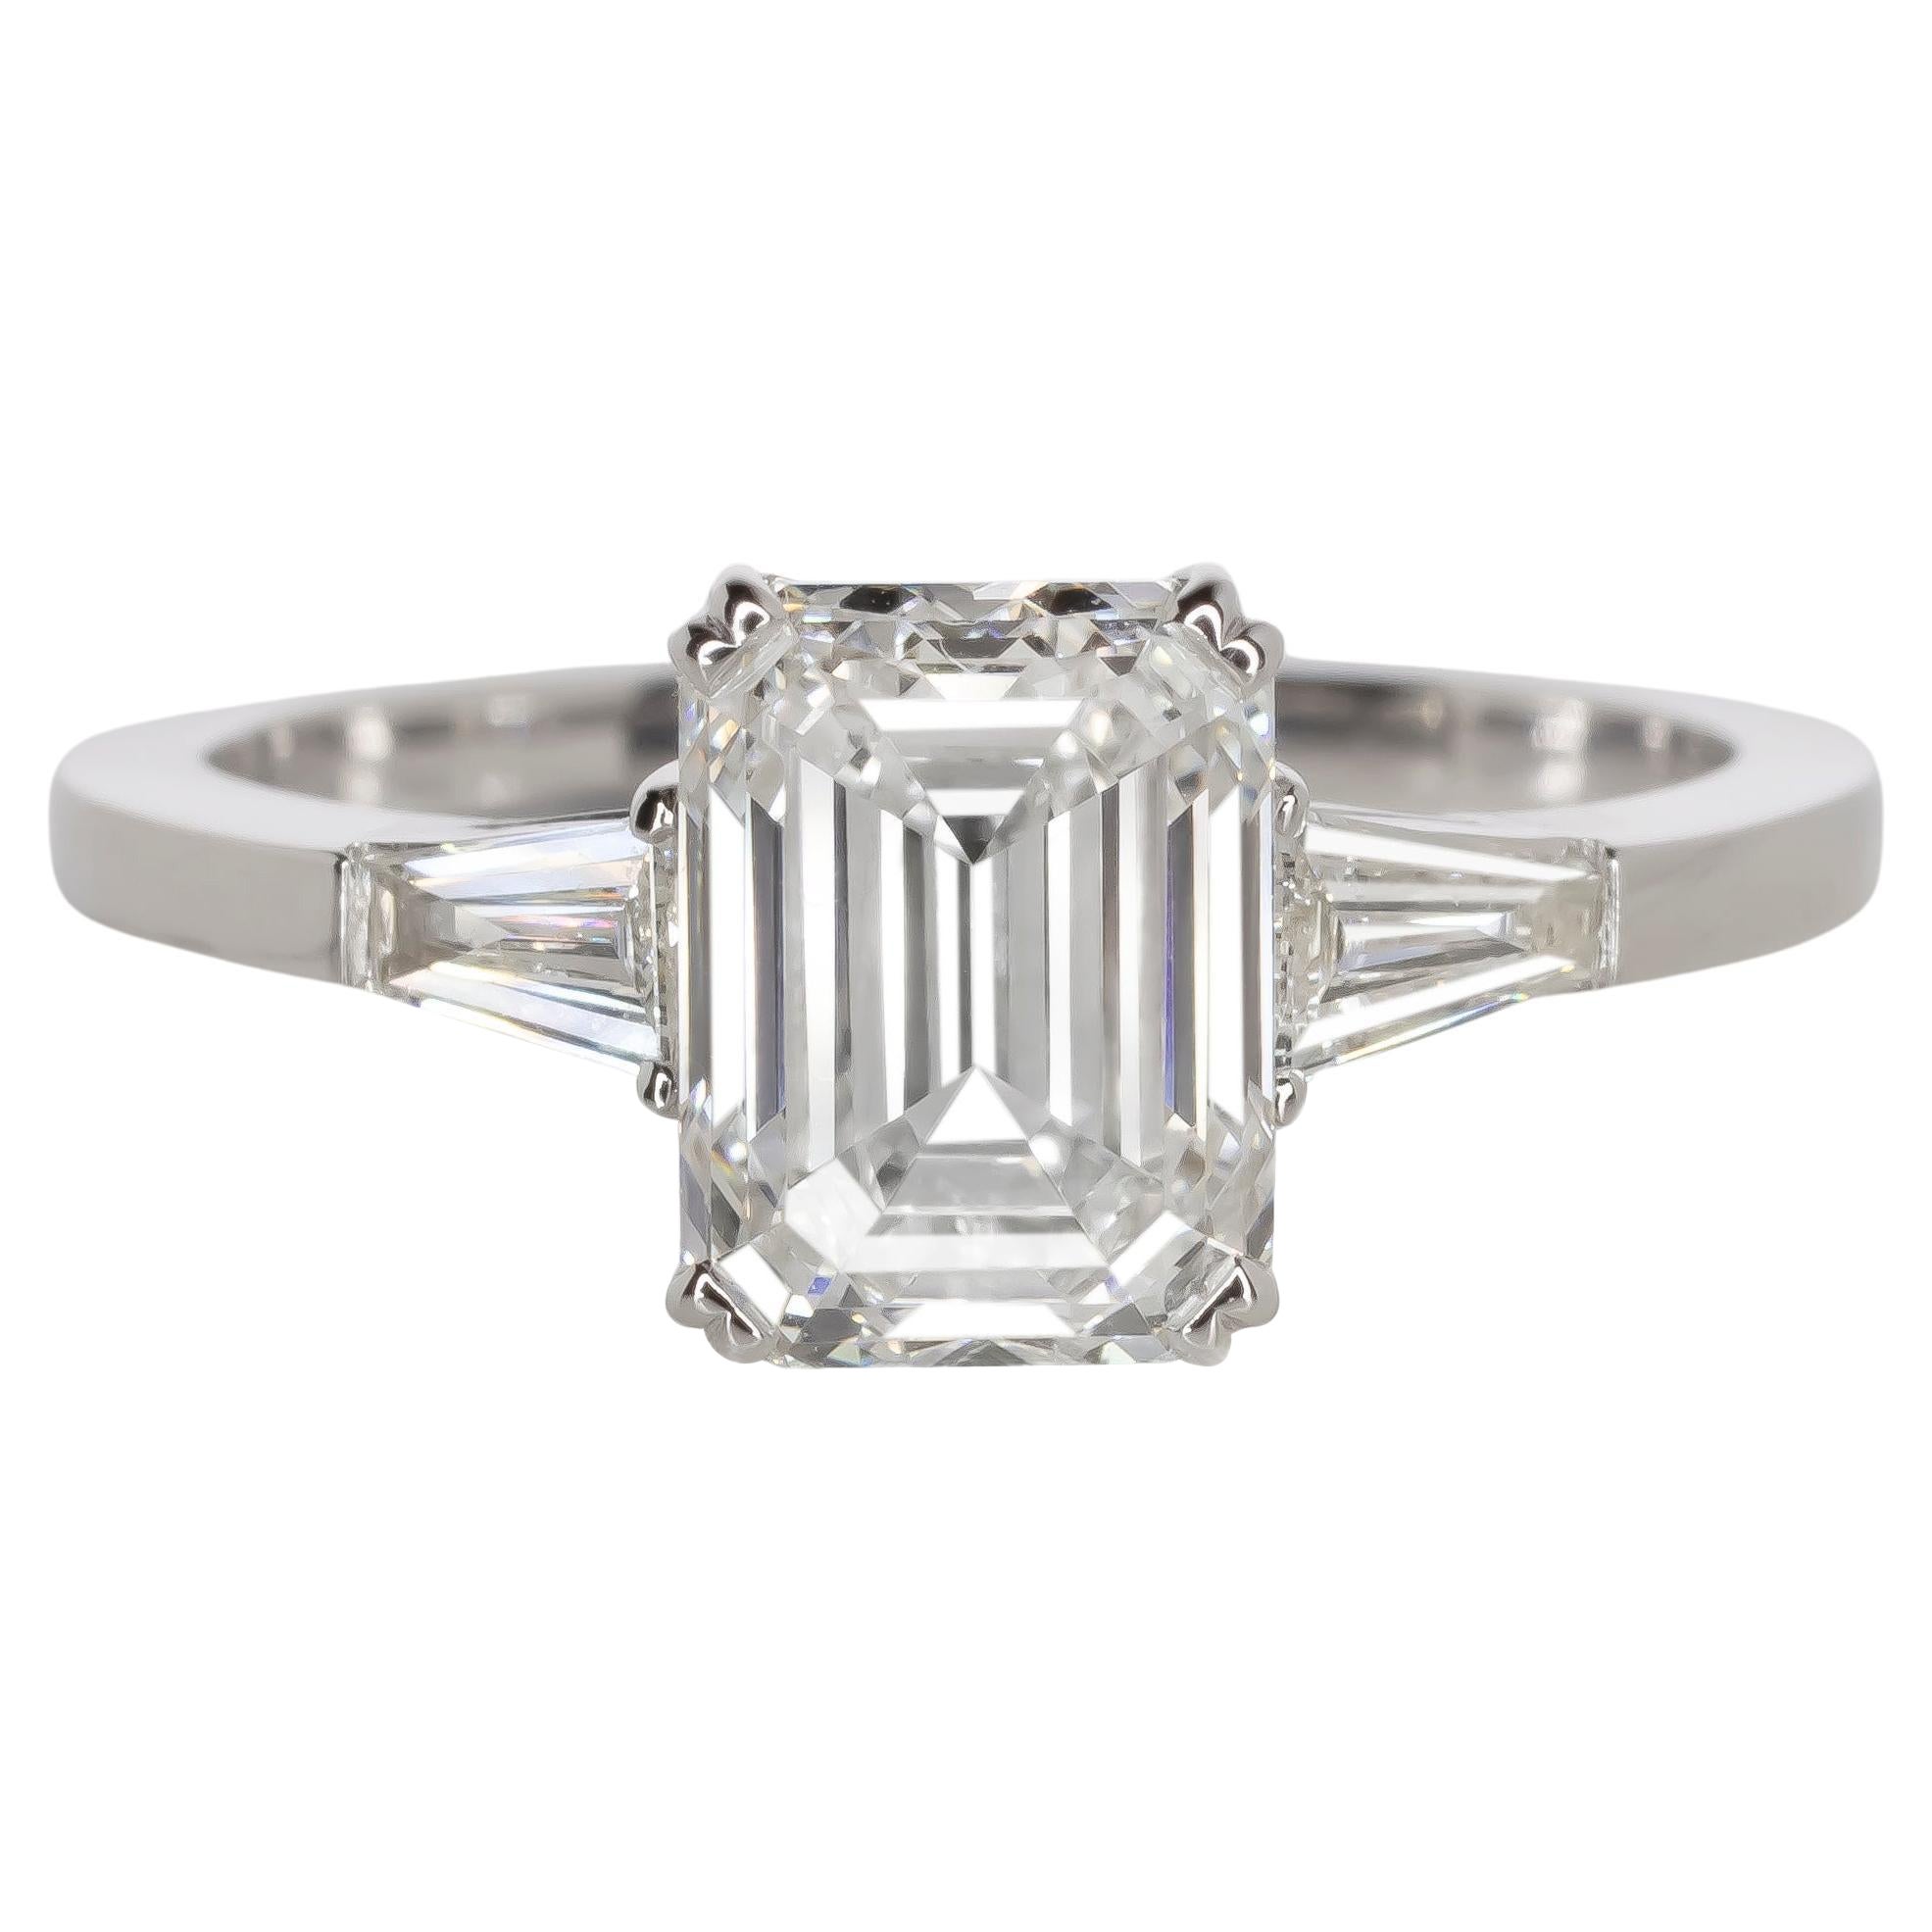 GIA Certified 2.01 Carat Emerald Cut Diamond 18K White Gold Ring For Sale